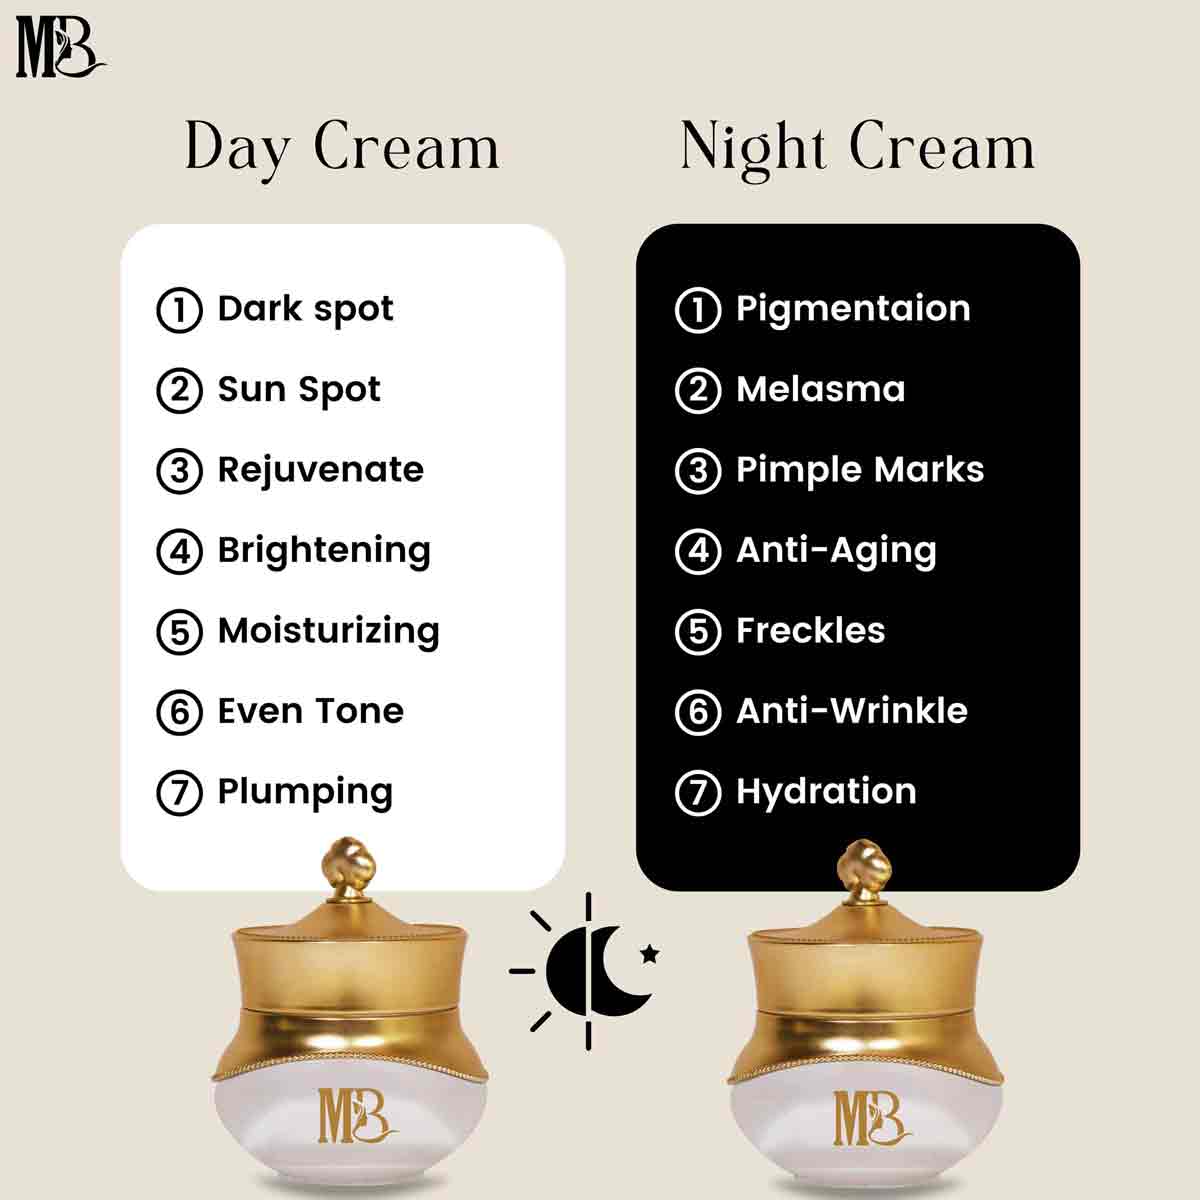 Image displaying Muna Belleza Day and Night Creams with listed benefits. Day Cream for dark spots, sun spots, rejuvenation, brightening, moisturizing, even tone, and plumping. Night Cream targets pigmentation, melasma, pimple marks, anti-aging, freckles, anti-wrinkle, and hydration.